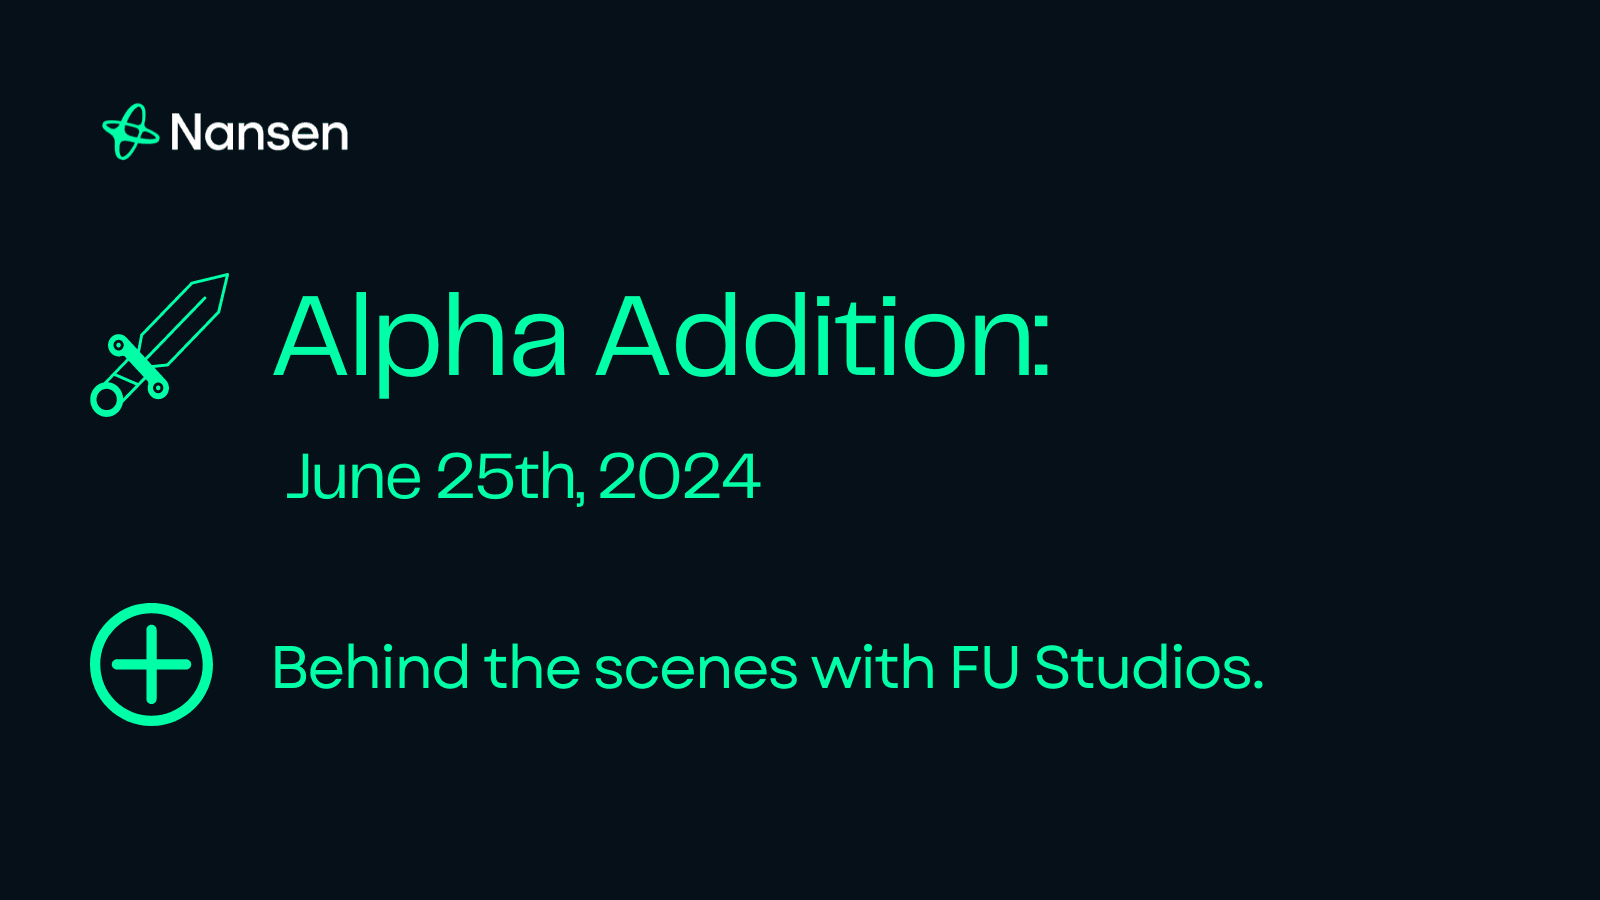 Alpha Addition: Behind the Scenes With FU Studios | June 25th, 2024 article thumbnail